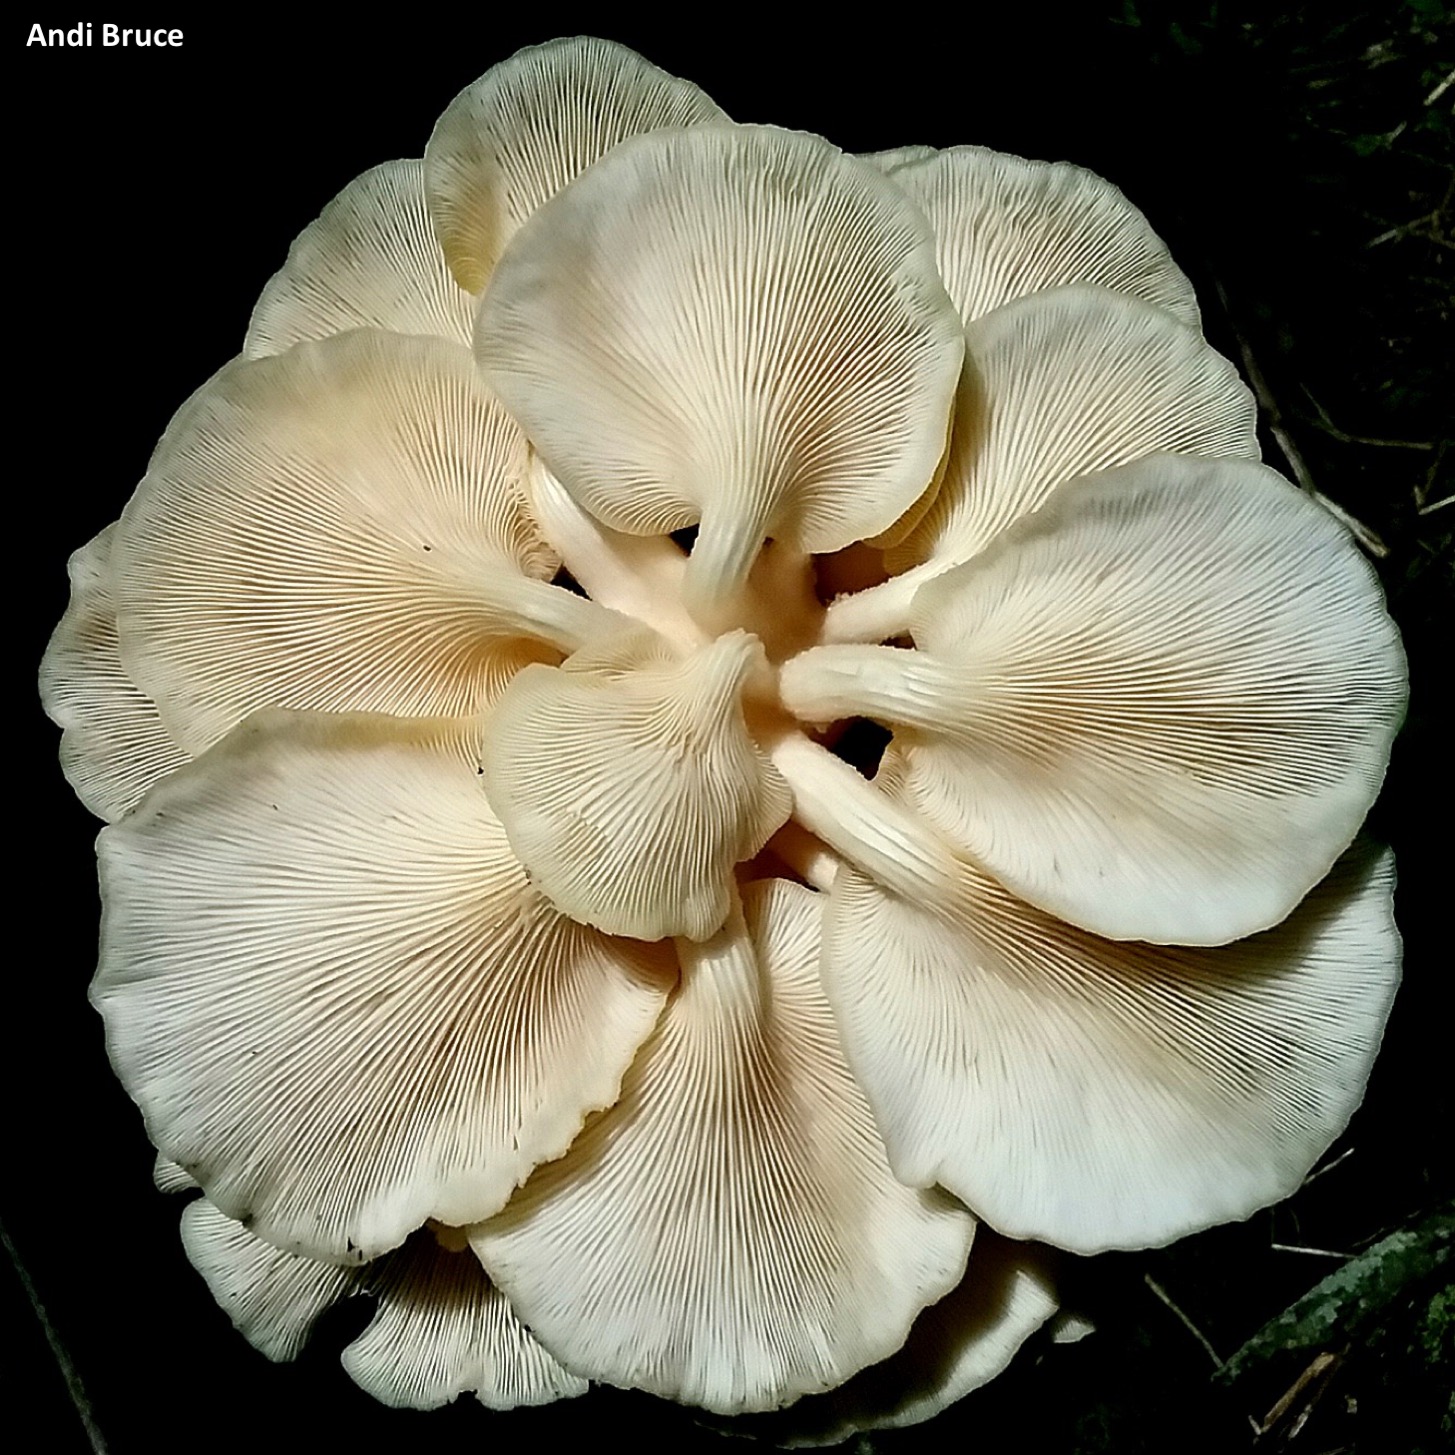 golden-oysters-gills